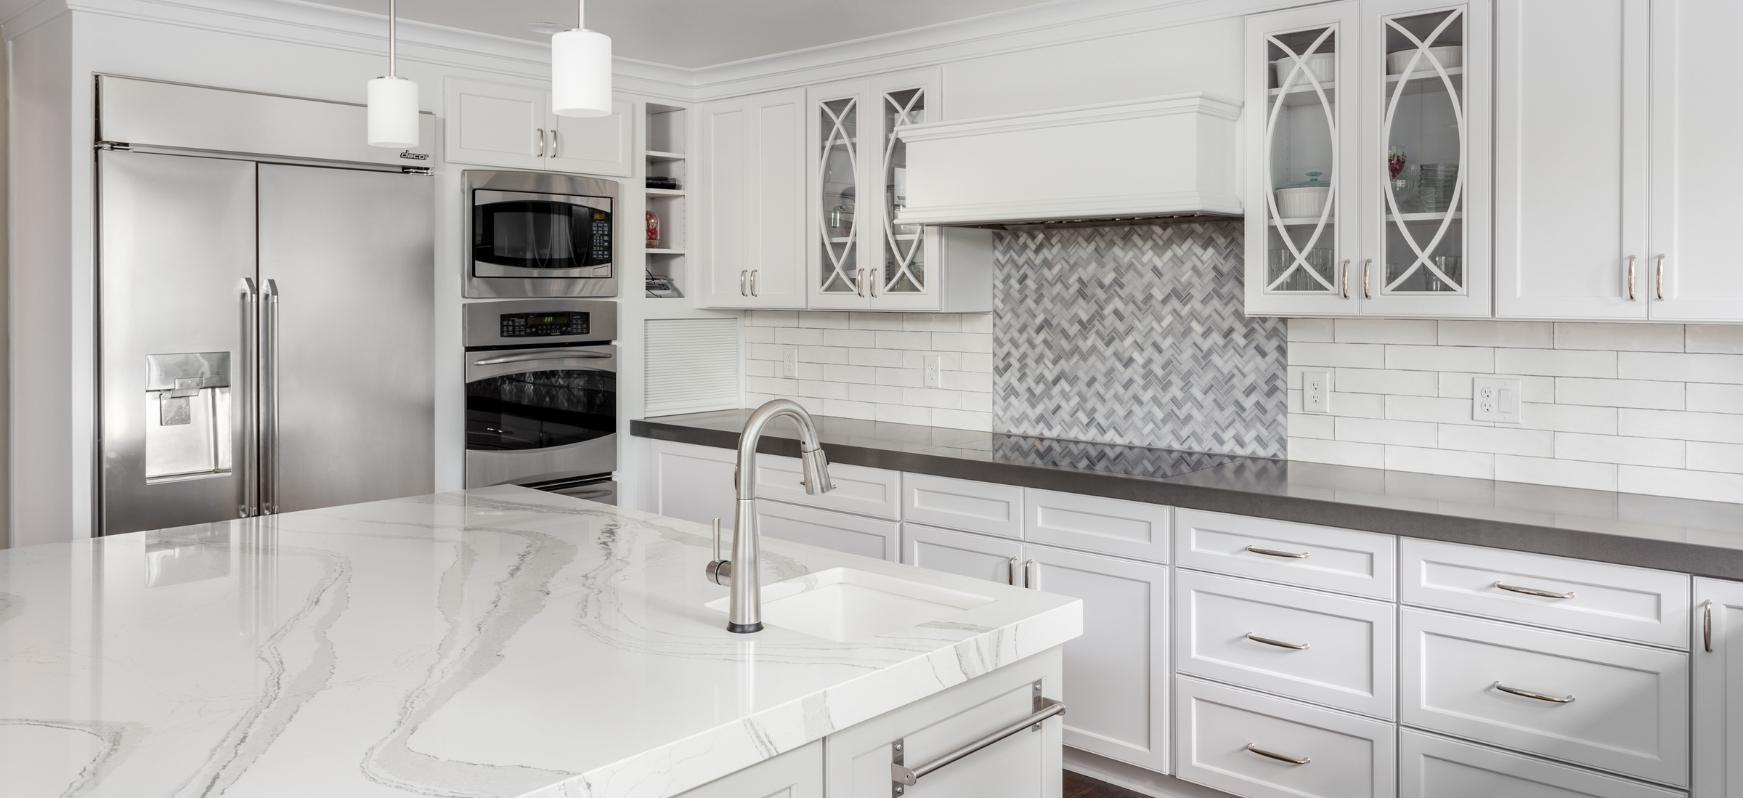 The Pros And Cons Of Quartz Countertops